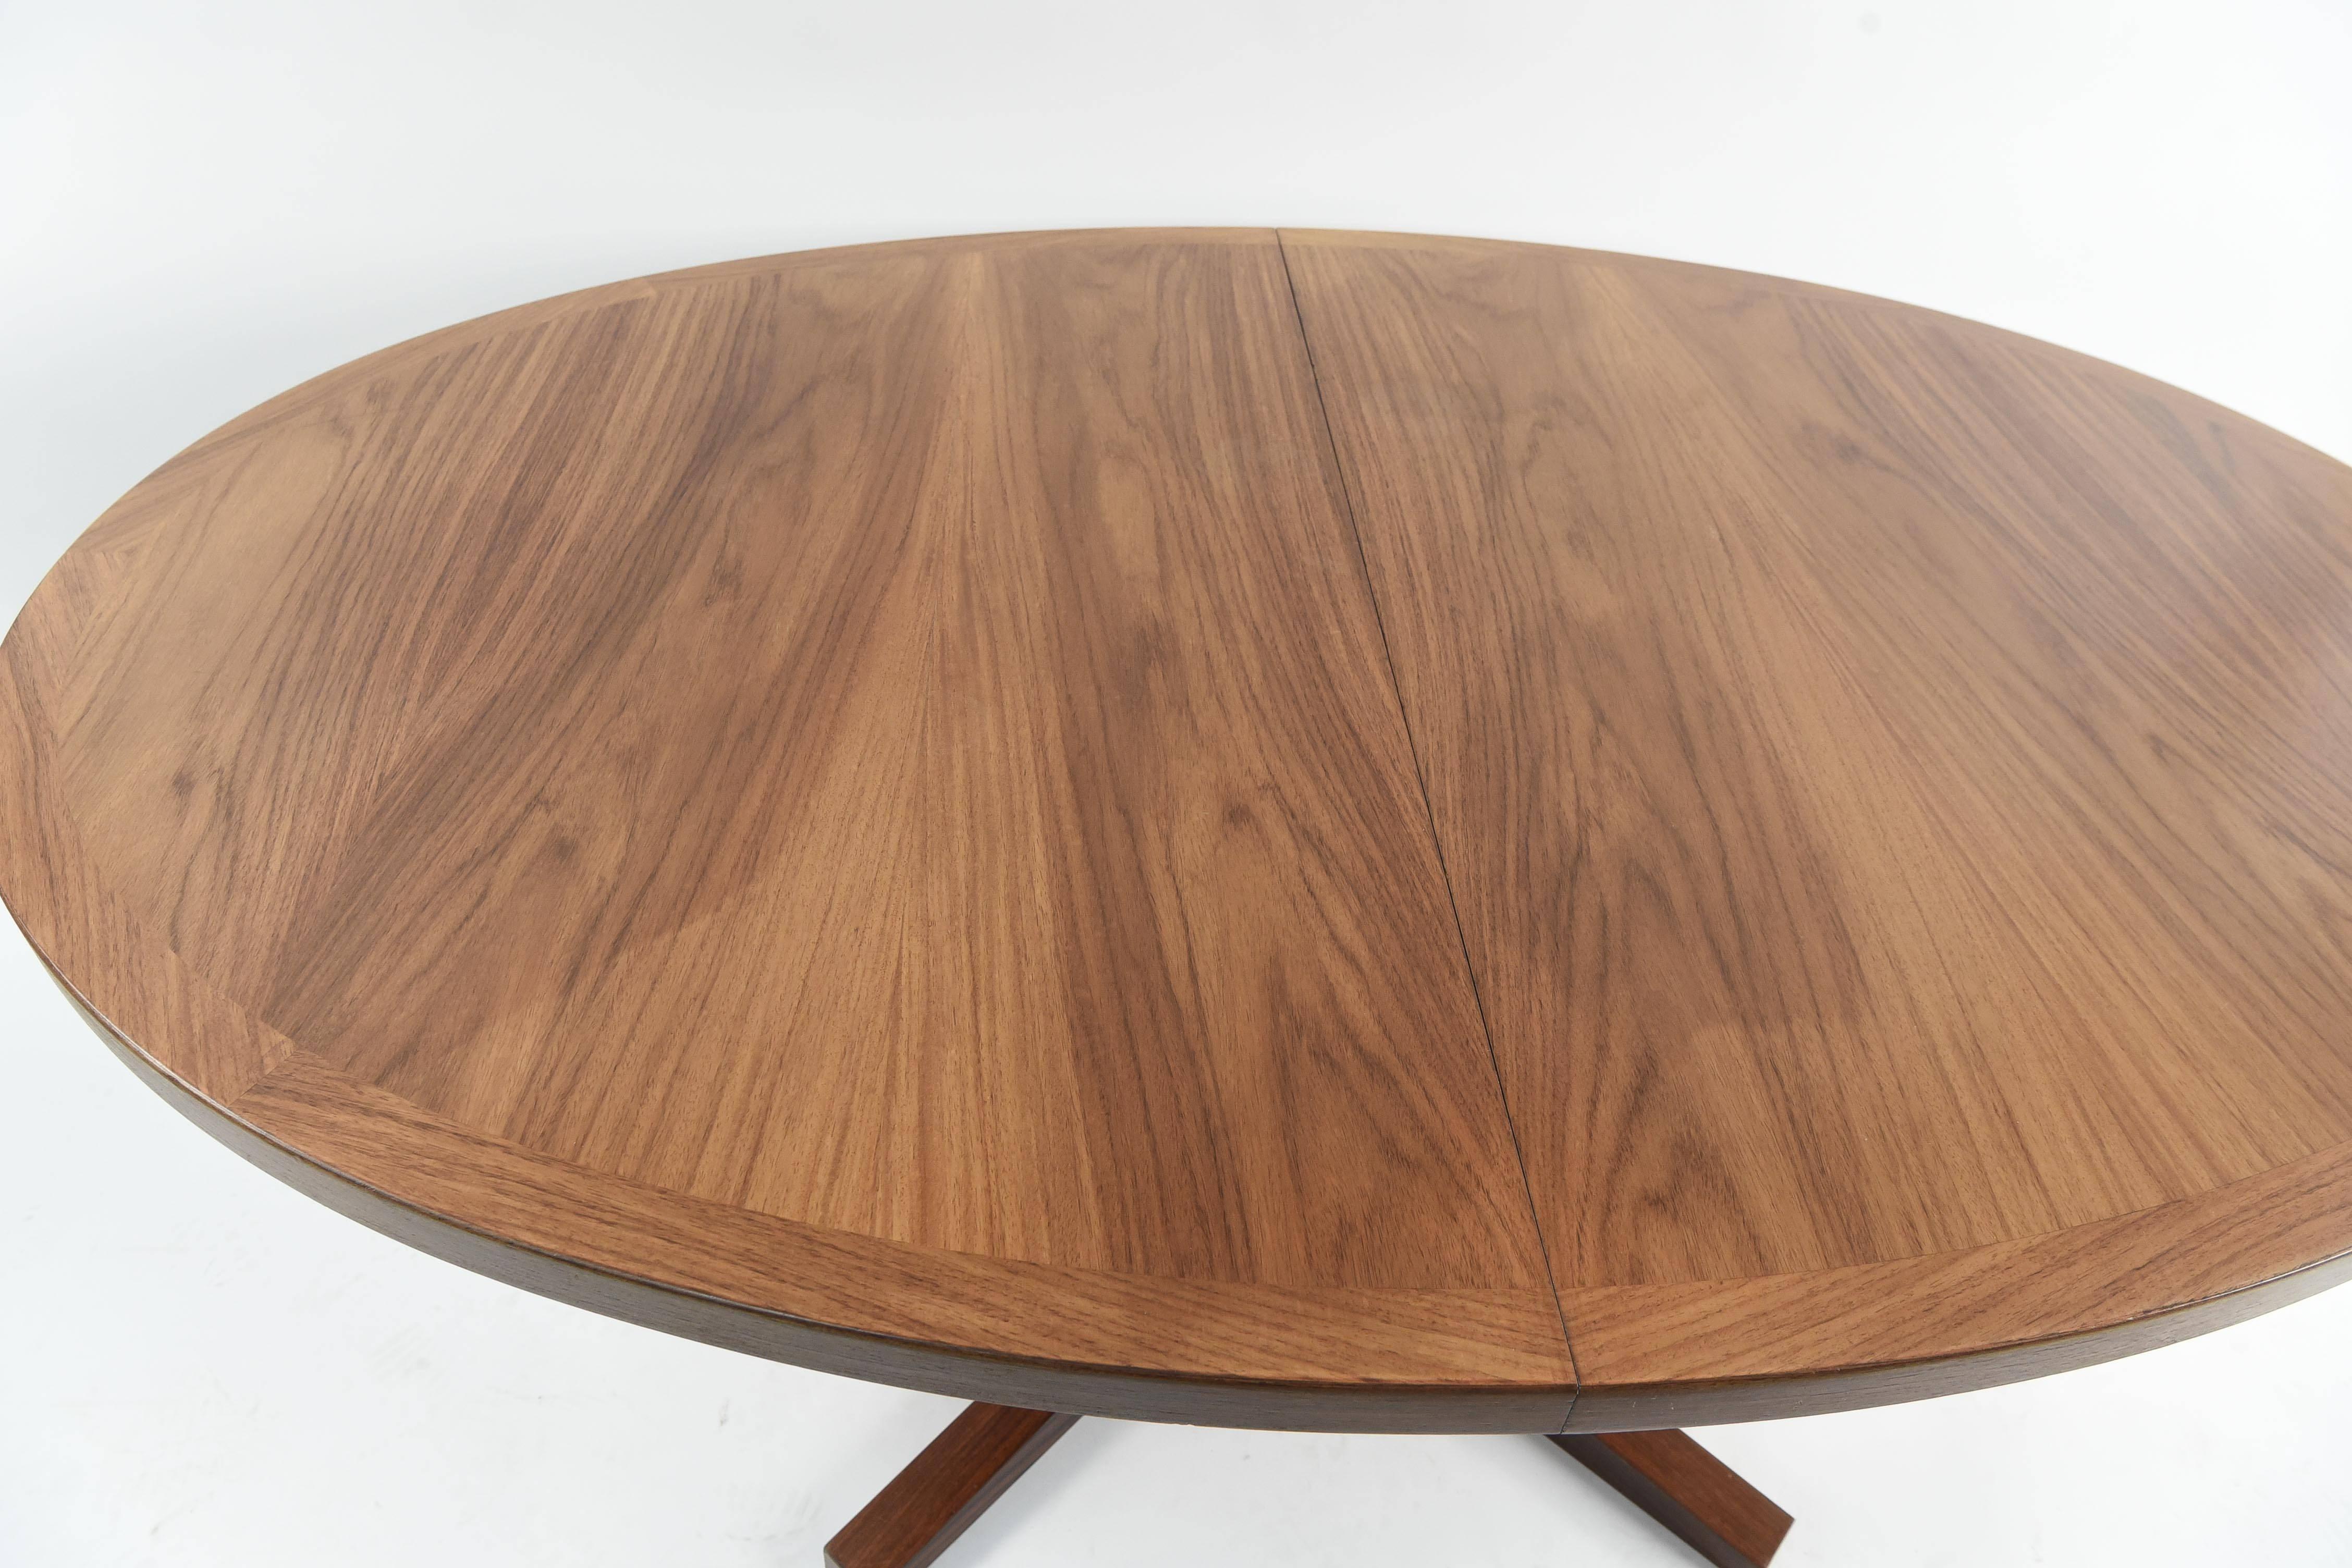 This oval dining table has been crafted from fine rosewood and includes two leafs to extend the table to accommodate more guests. Designed by John Mortensen, this table has a sturdy, elegant form. Manufactured by Heltborg Møbler. Each leaf adds 19.5